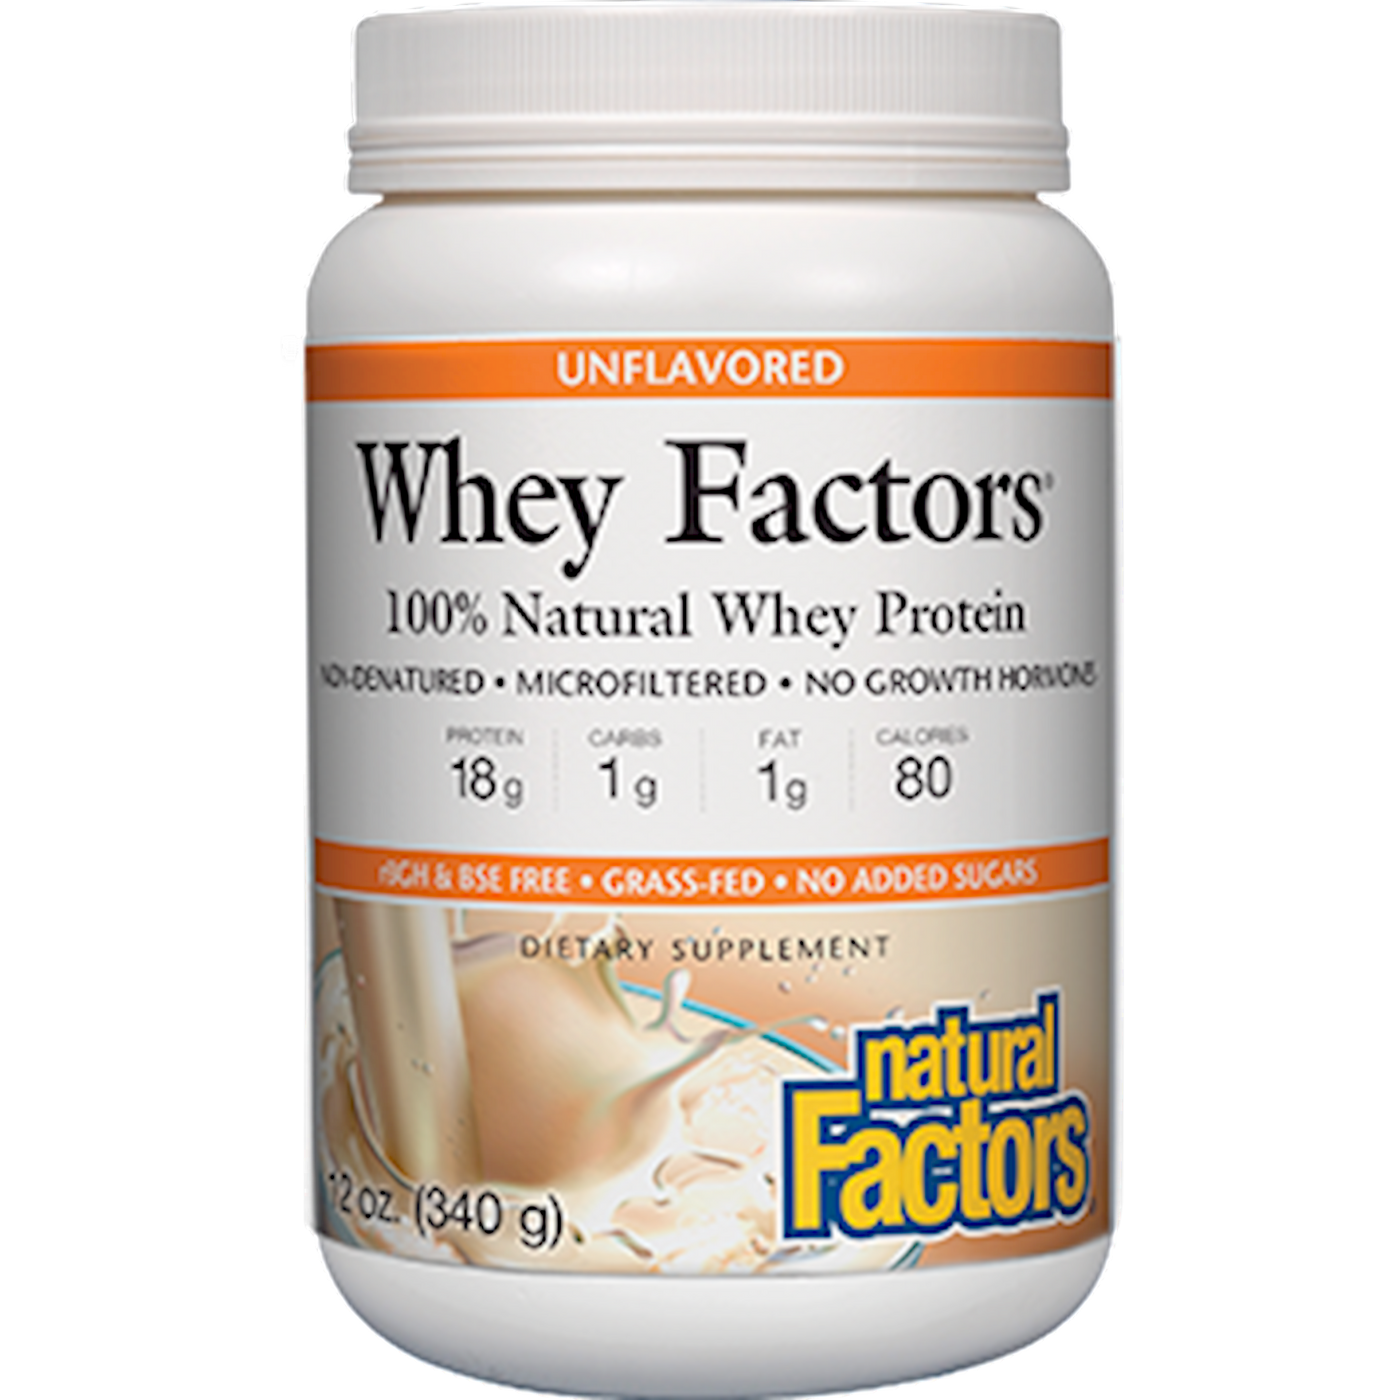 Whey Factors Unflavored Powder  Curated Wellness